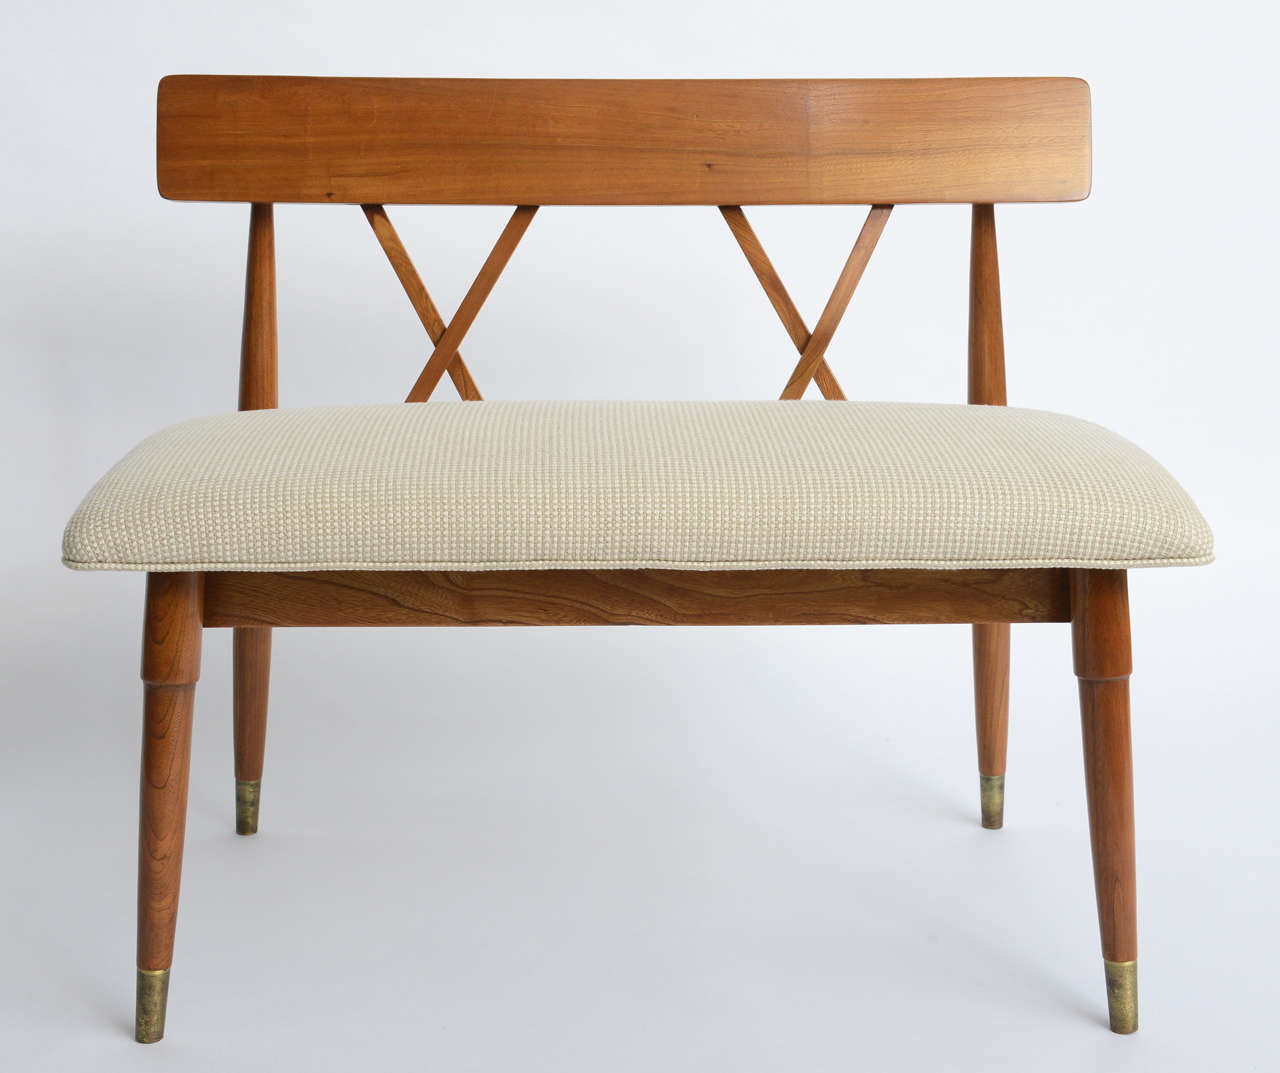 ....SOLD...With stylish simplicity and clean design this blond wood bench or two-seat is a Mid-Century Paul McCobb inspired creation. Totally restored, new neutral upholstery. Wonderful crossed back spines and aged brass sabot leg caps. A bit of